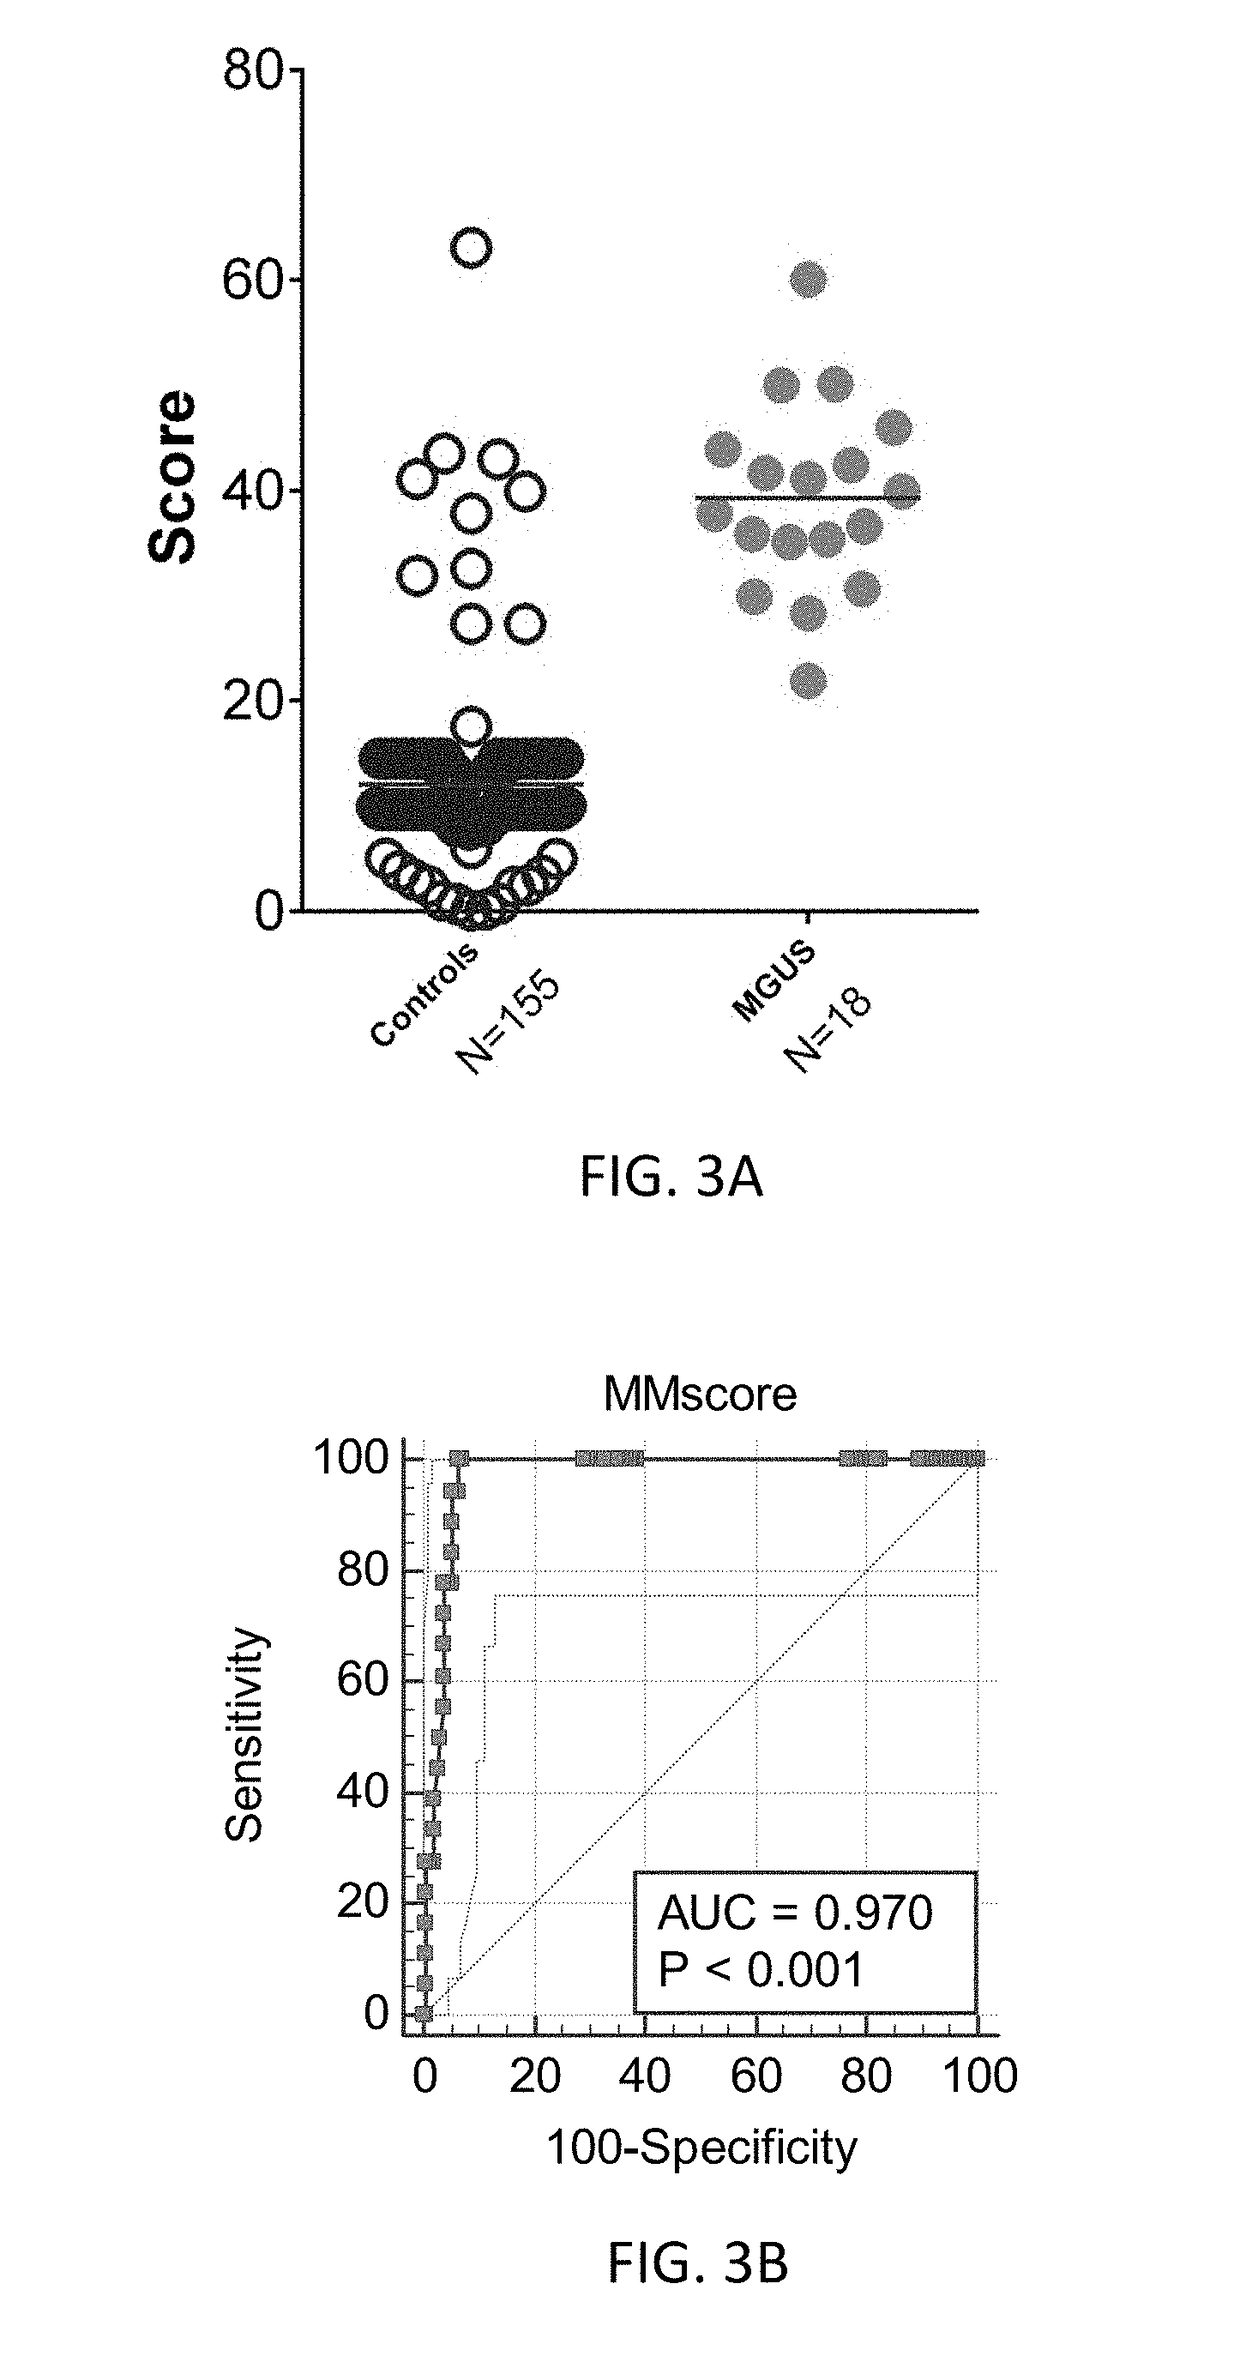 Methods for detection of plasma cell dyscrasia